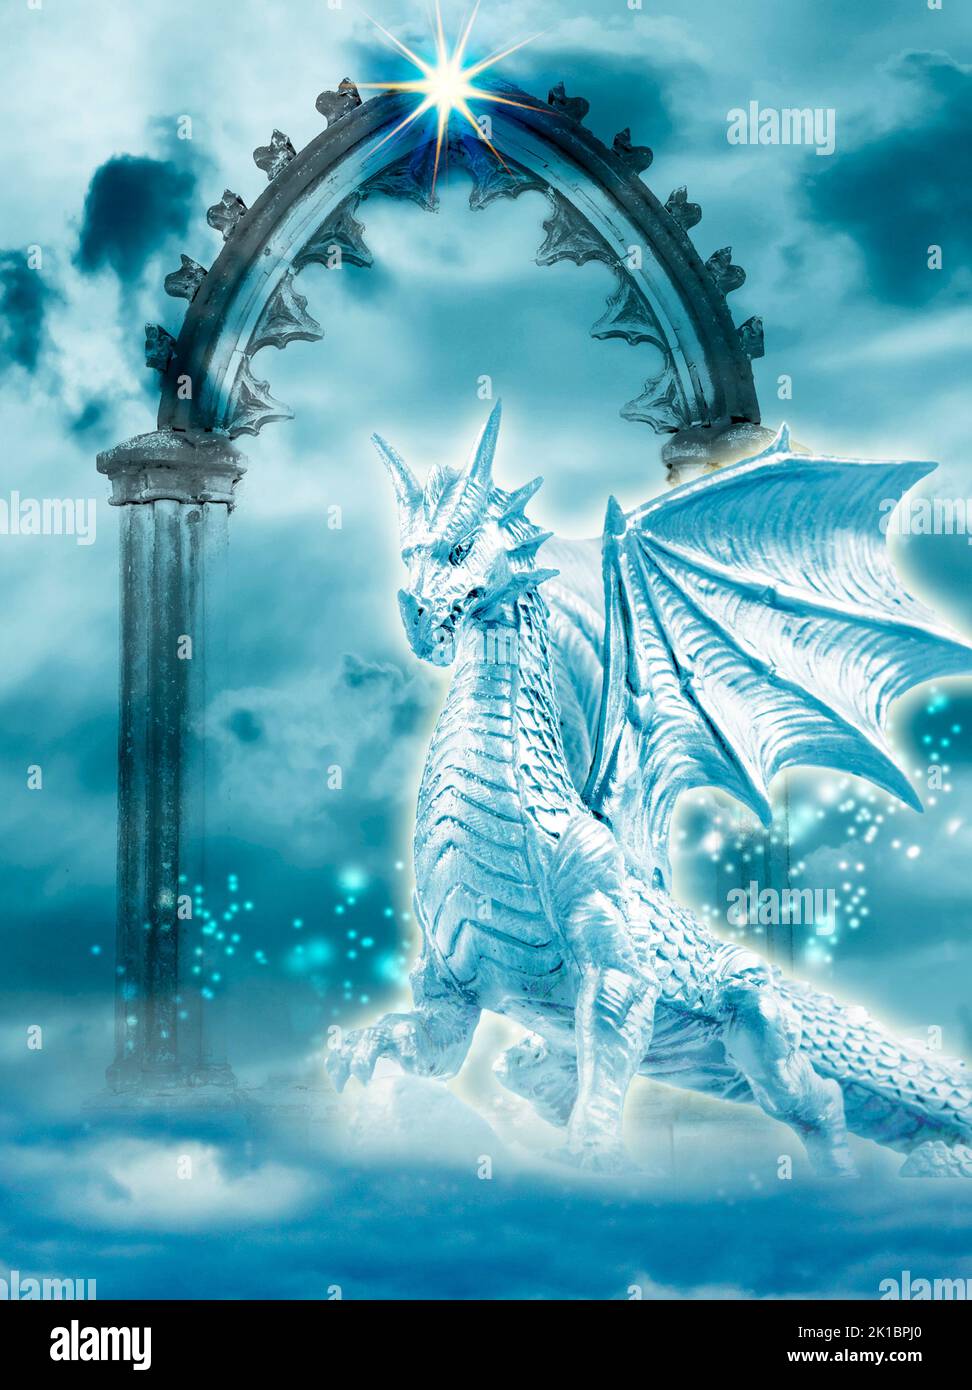 majestic dragon over magic mystical sky and open gate Stock Photo